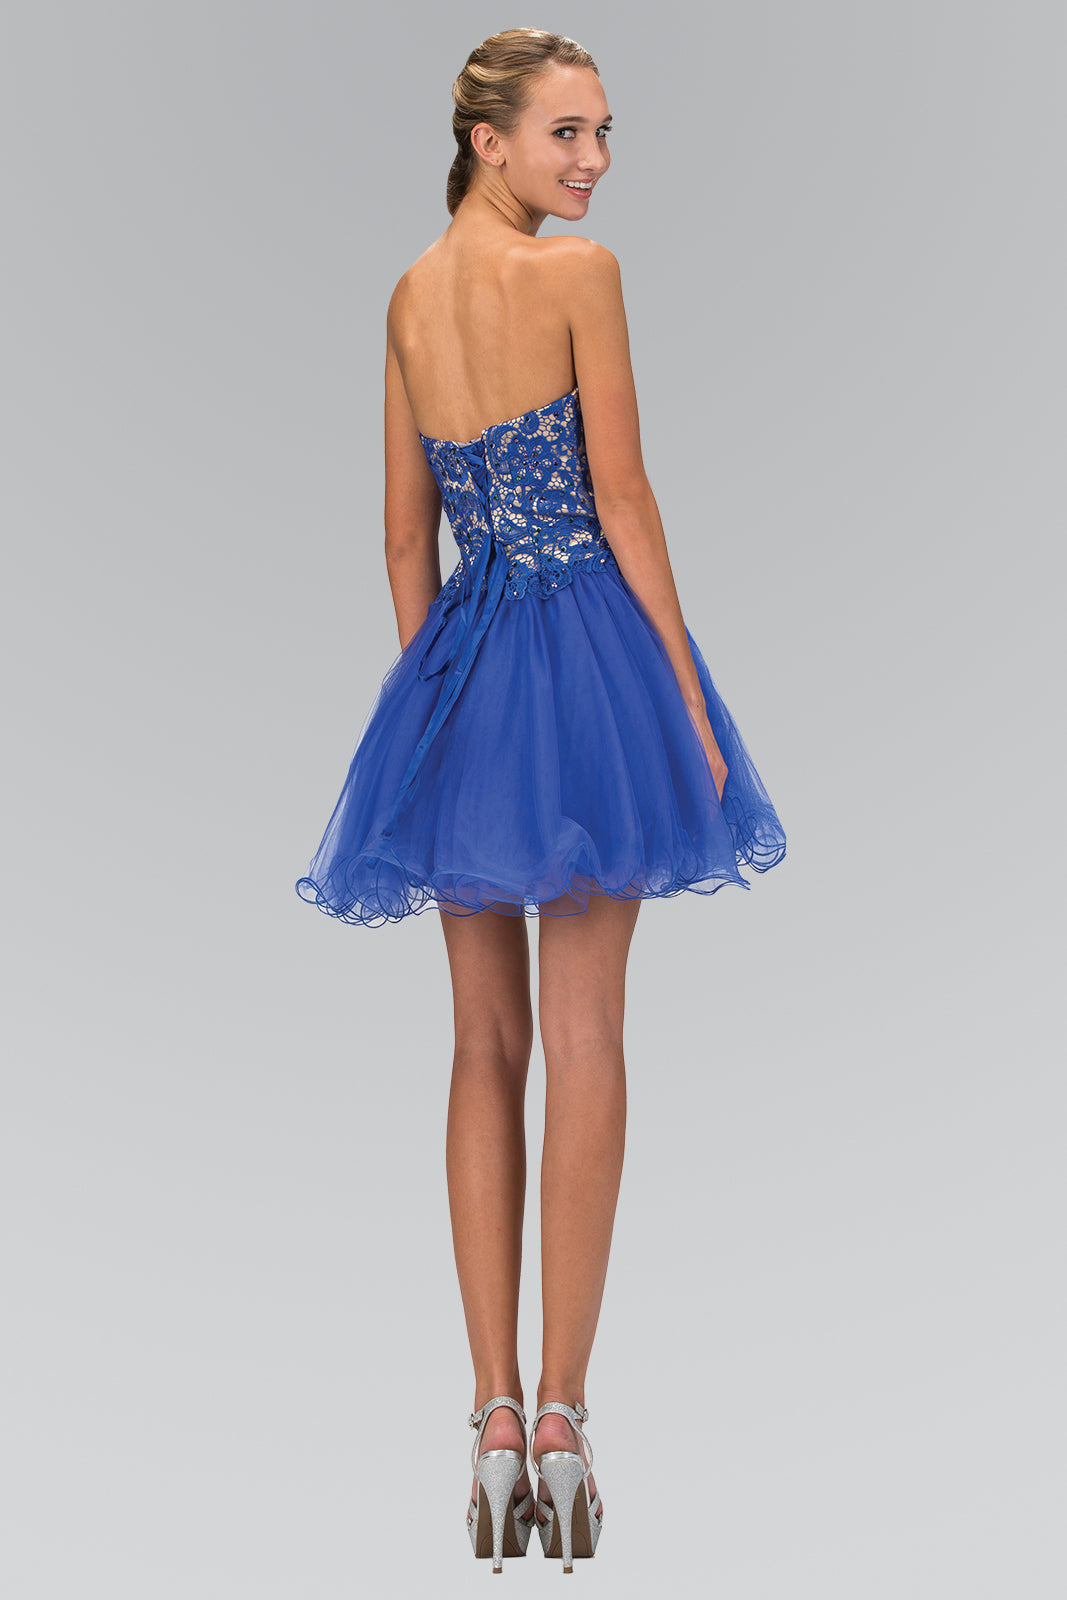 Strapless Sweetheart Tulle Short Dress with Lace Bodice GLGS1110 Elsy Style HOMECOMING